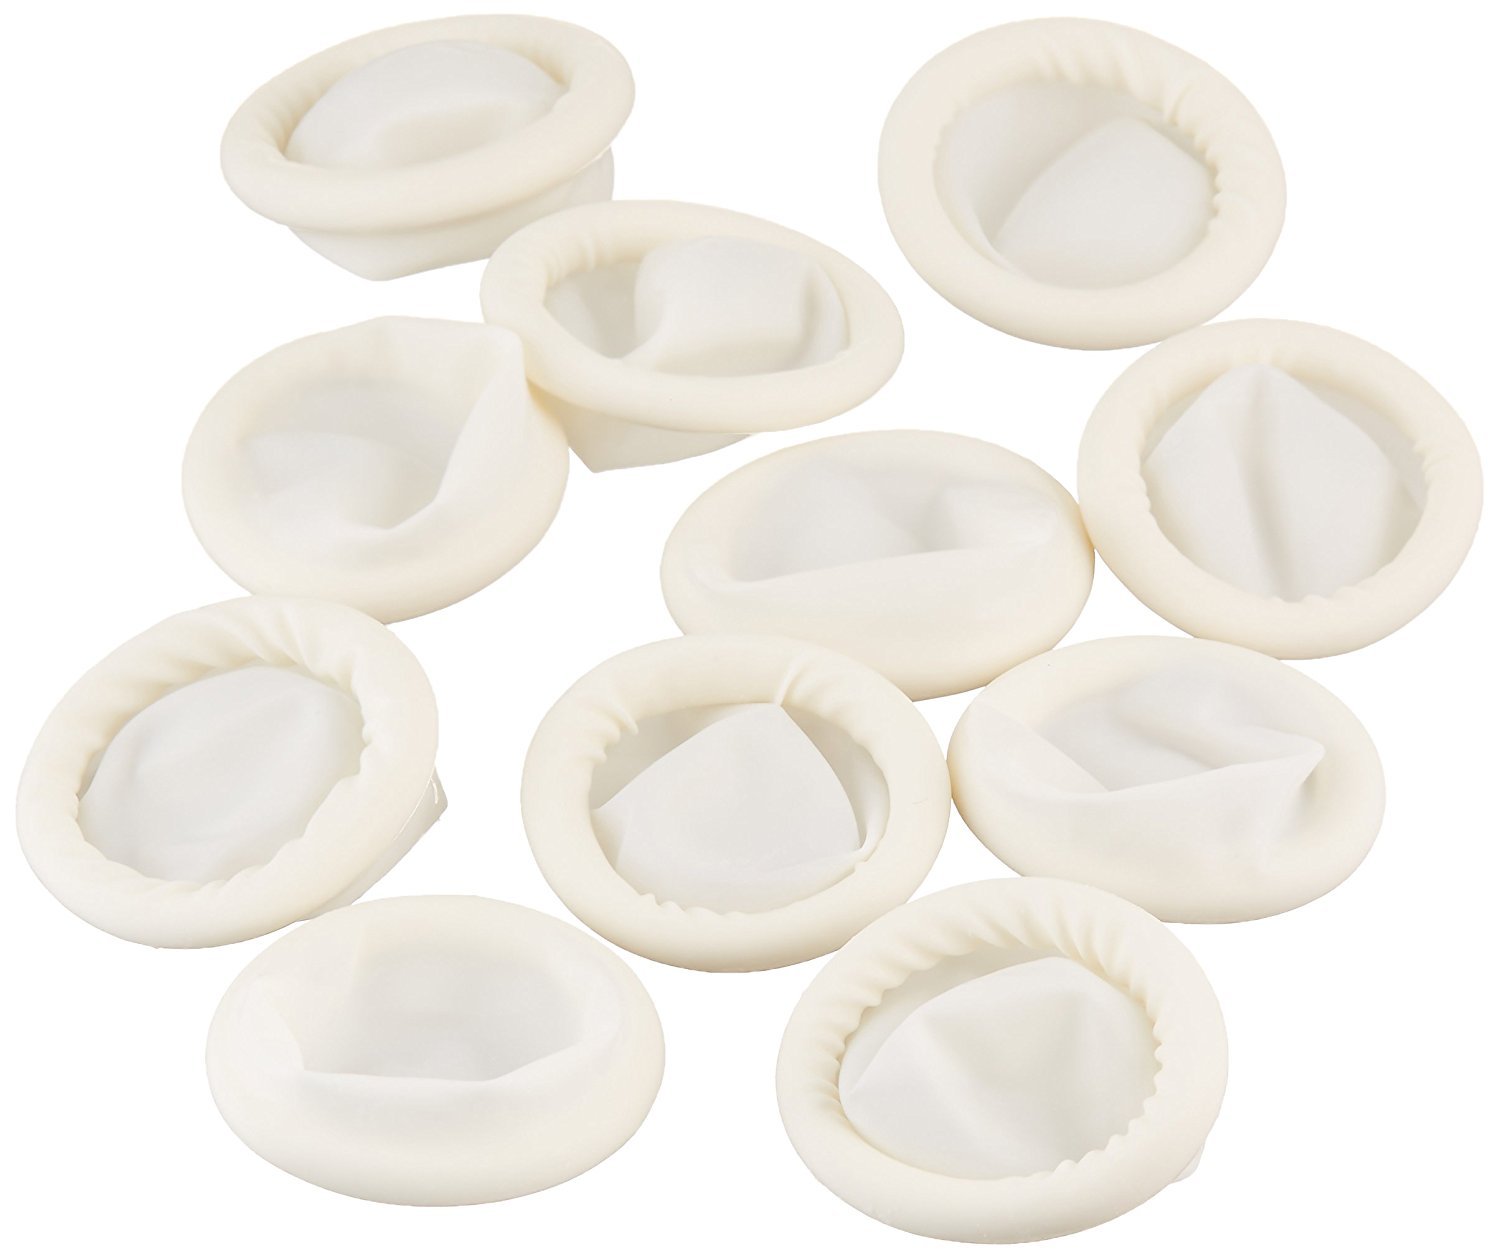 Bertech General-Purpose Latex Finger Cots, Powder-Free, Large, White (Pack of 1440)